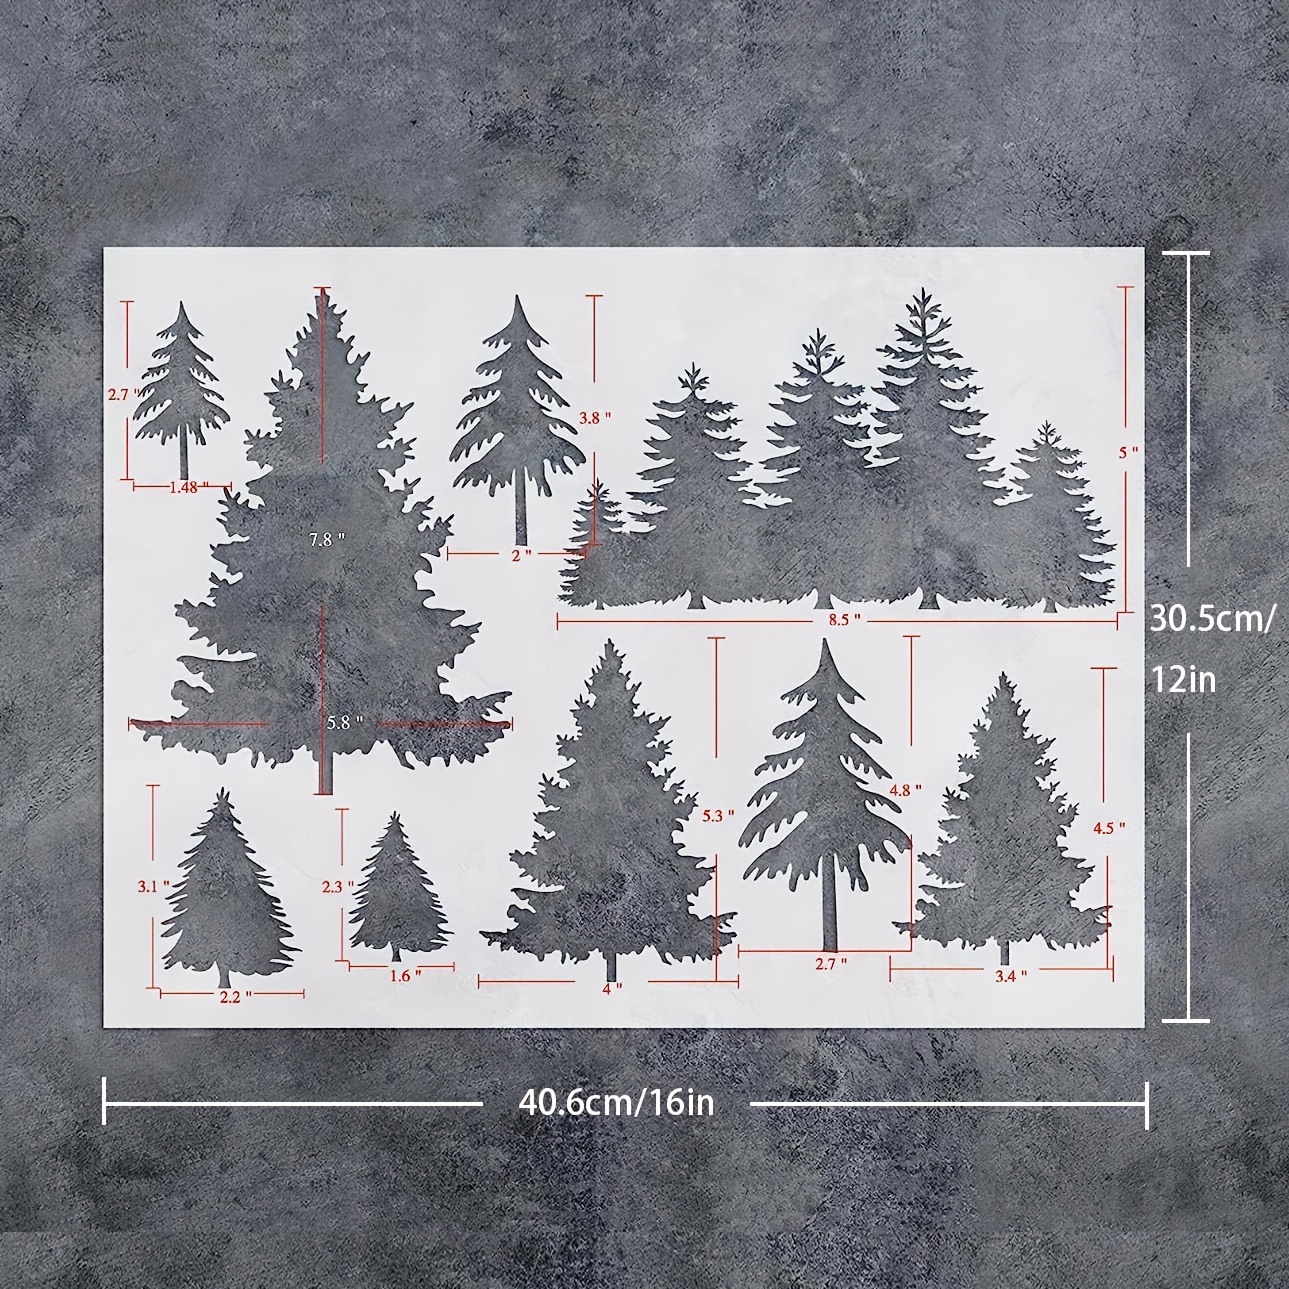 Mountain Stencils for Painting Forest Tree Stencil Animal Wood Burning  Stencils and Patterns Reusable Drawing Templates for Fabric Furniture Wall  DIY